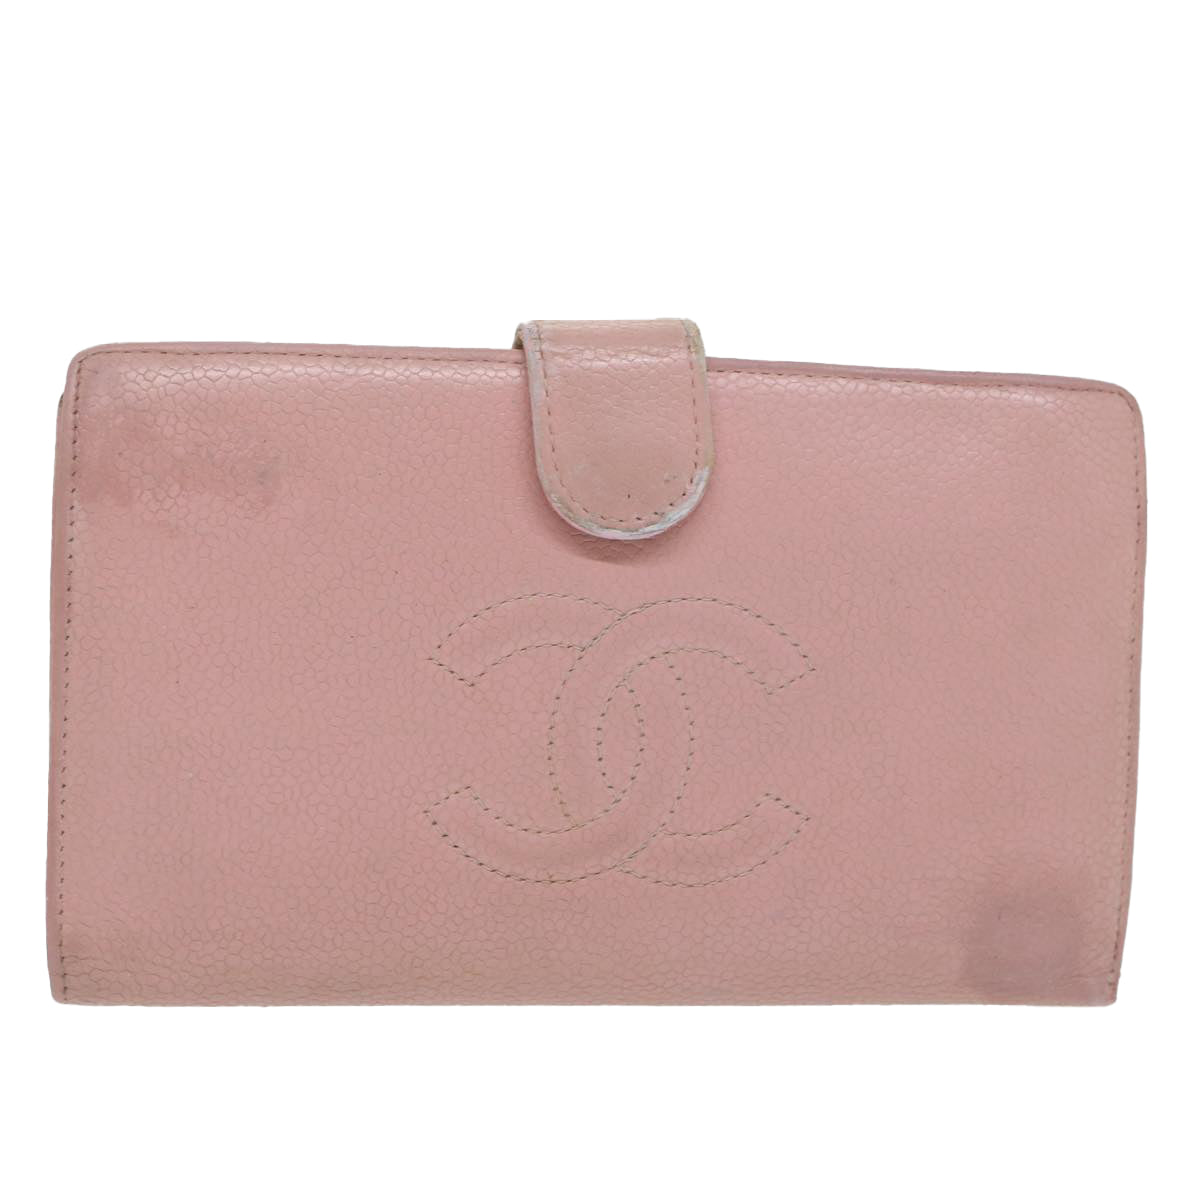 CHANEL Long Wallet Caviar Skin Pink CC Auth bs11186 - 0